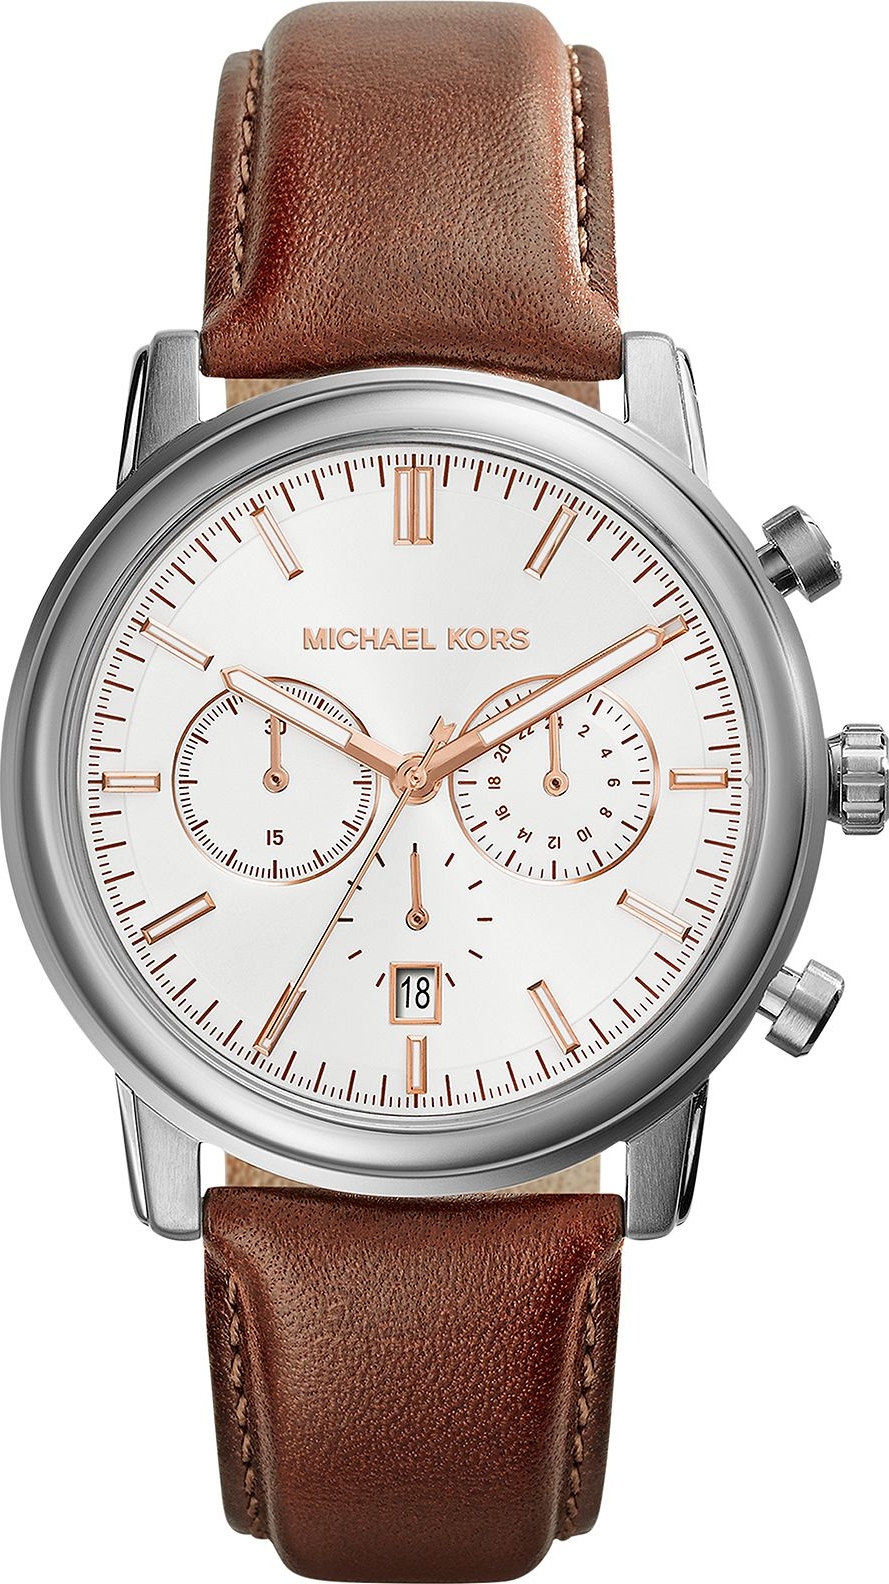 Michael Kors Watch Serial Number Authentication Flash Sales SAVE 52   alcaponefashionscoza